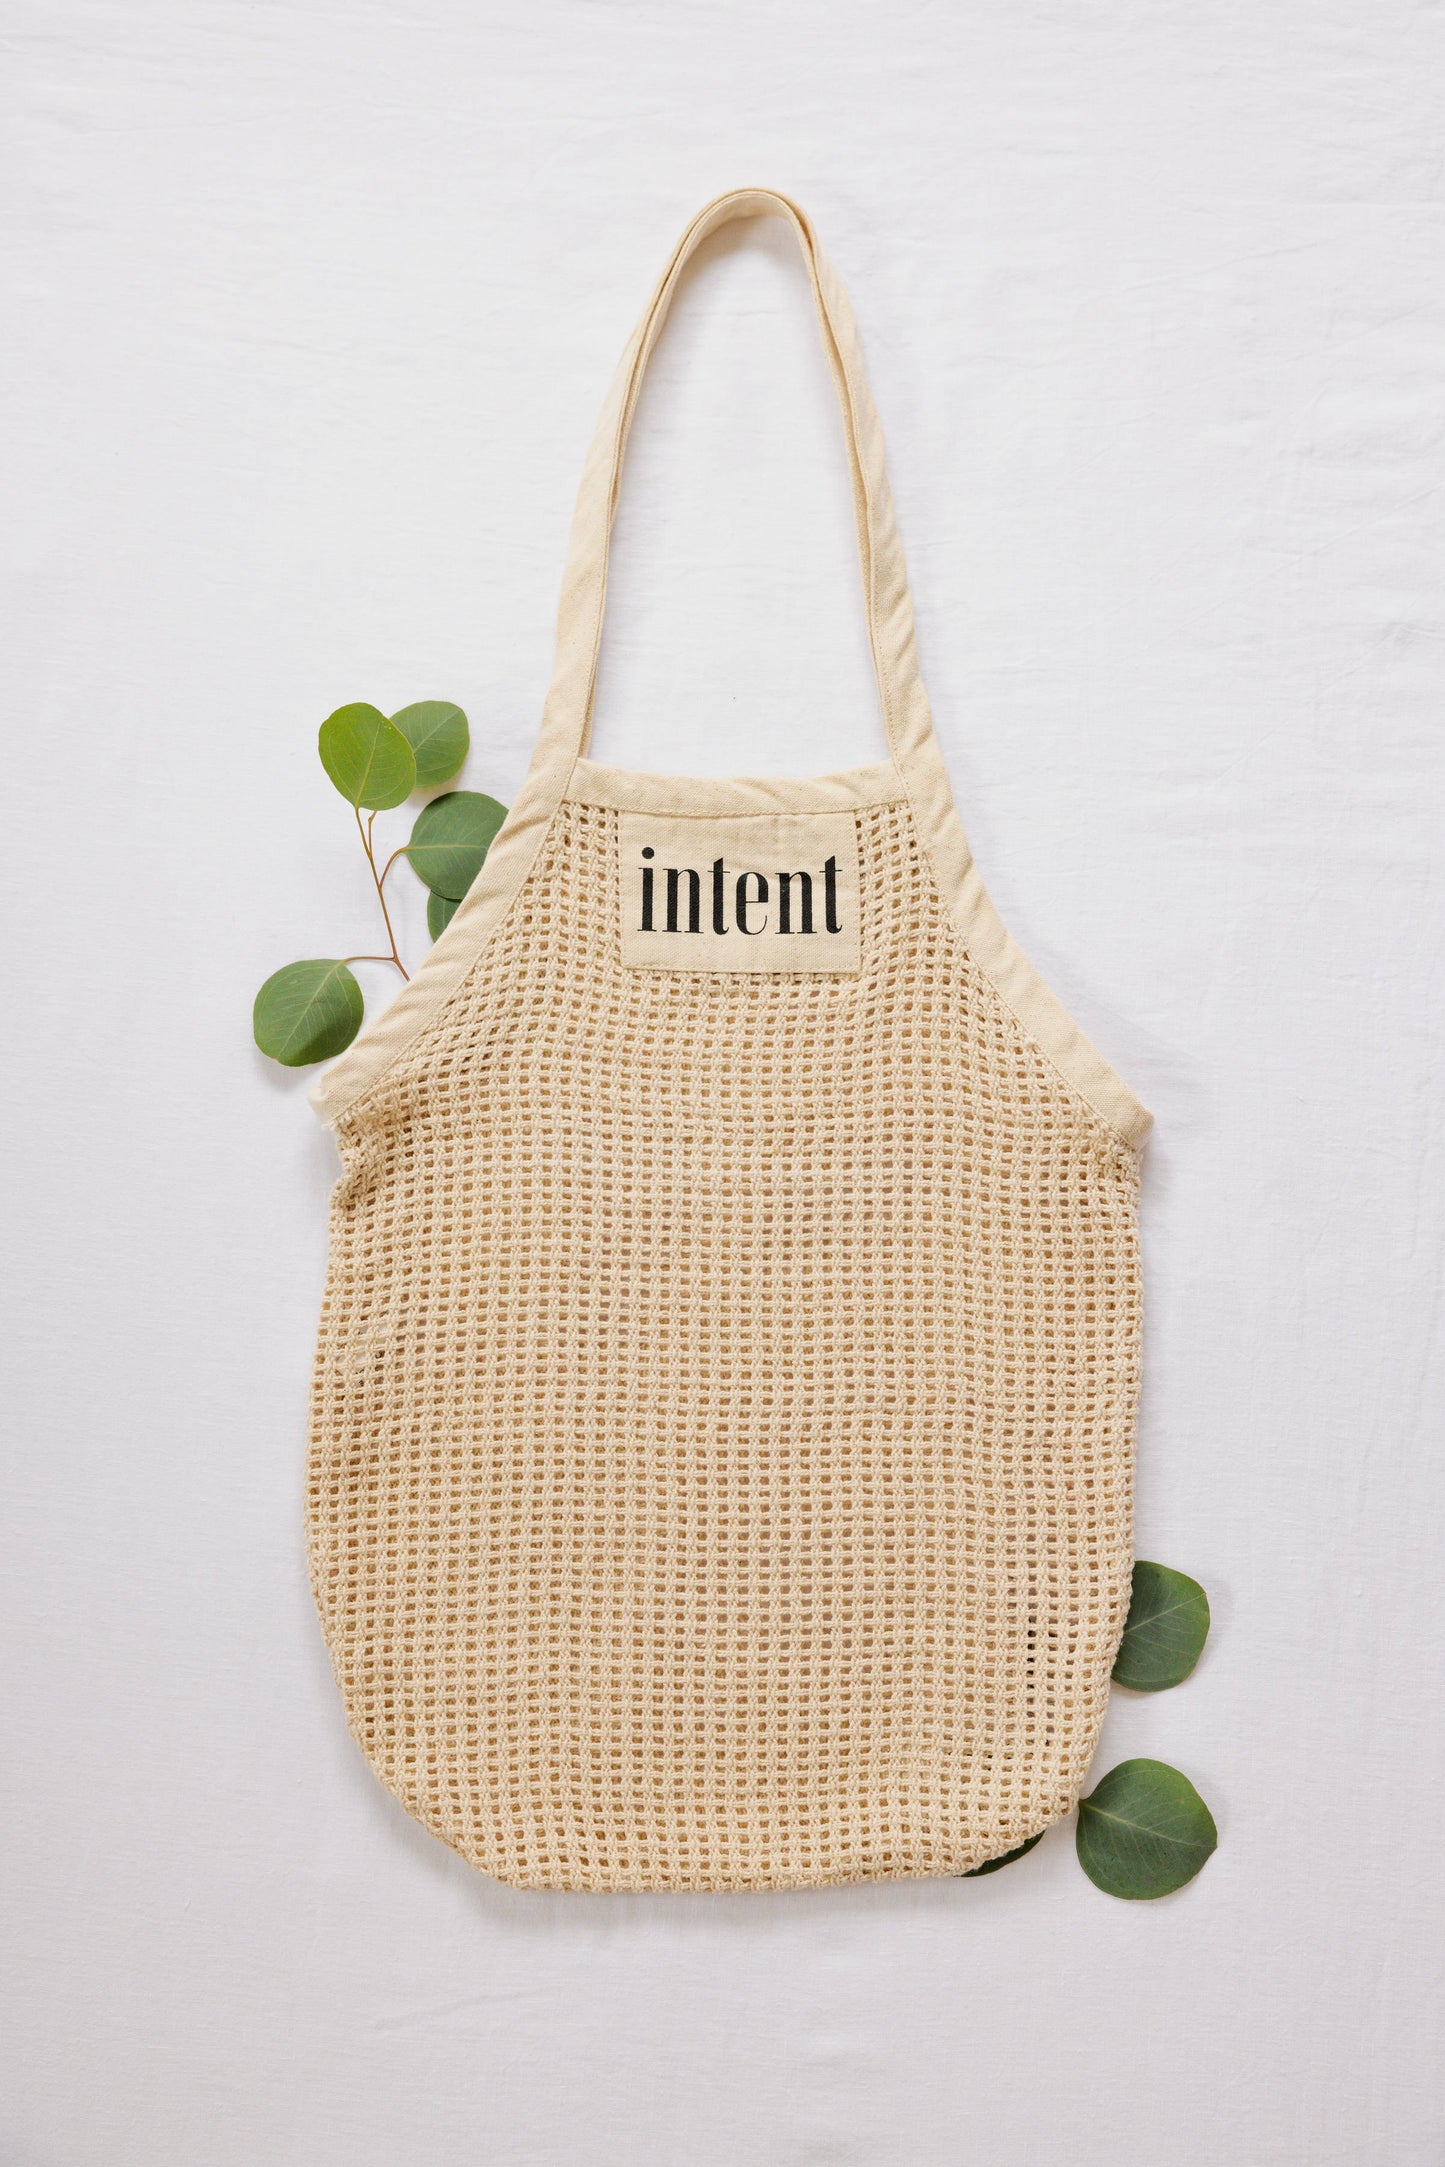 organic cotton and fair trade certified mesh tote.  use: great for groceries, farmers market, shopping, beach bag, etc.